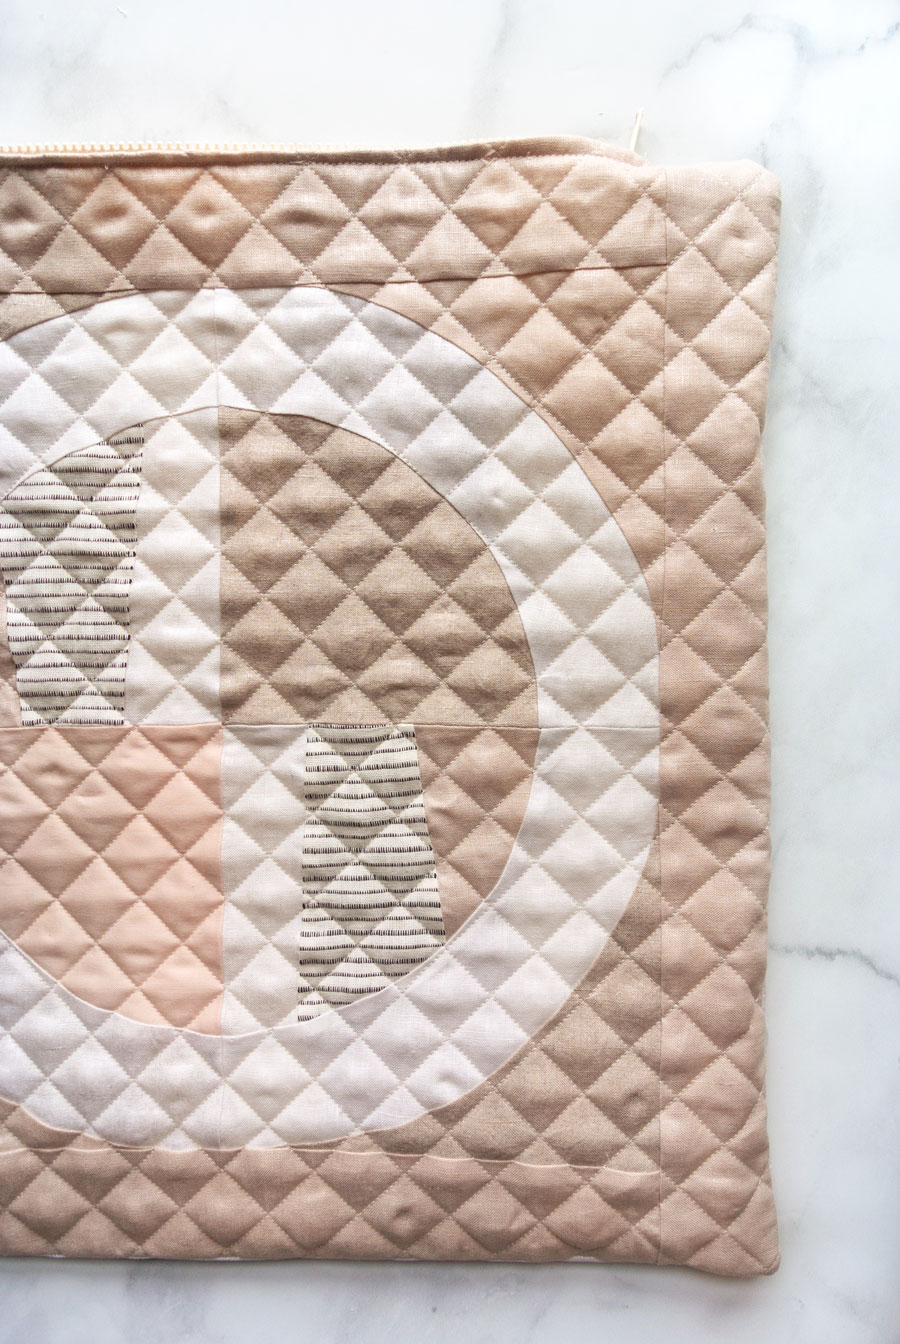 Elegant Quilted Pillow DIY! Sew a quilted zipper pillow with this step by step tutorial. I'll walk you through how to baste and quilt your pillow top, sew a zipper, and finish the pillow beautifully!